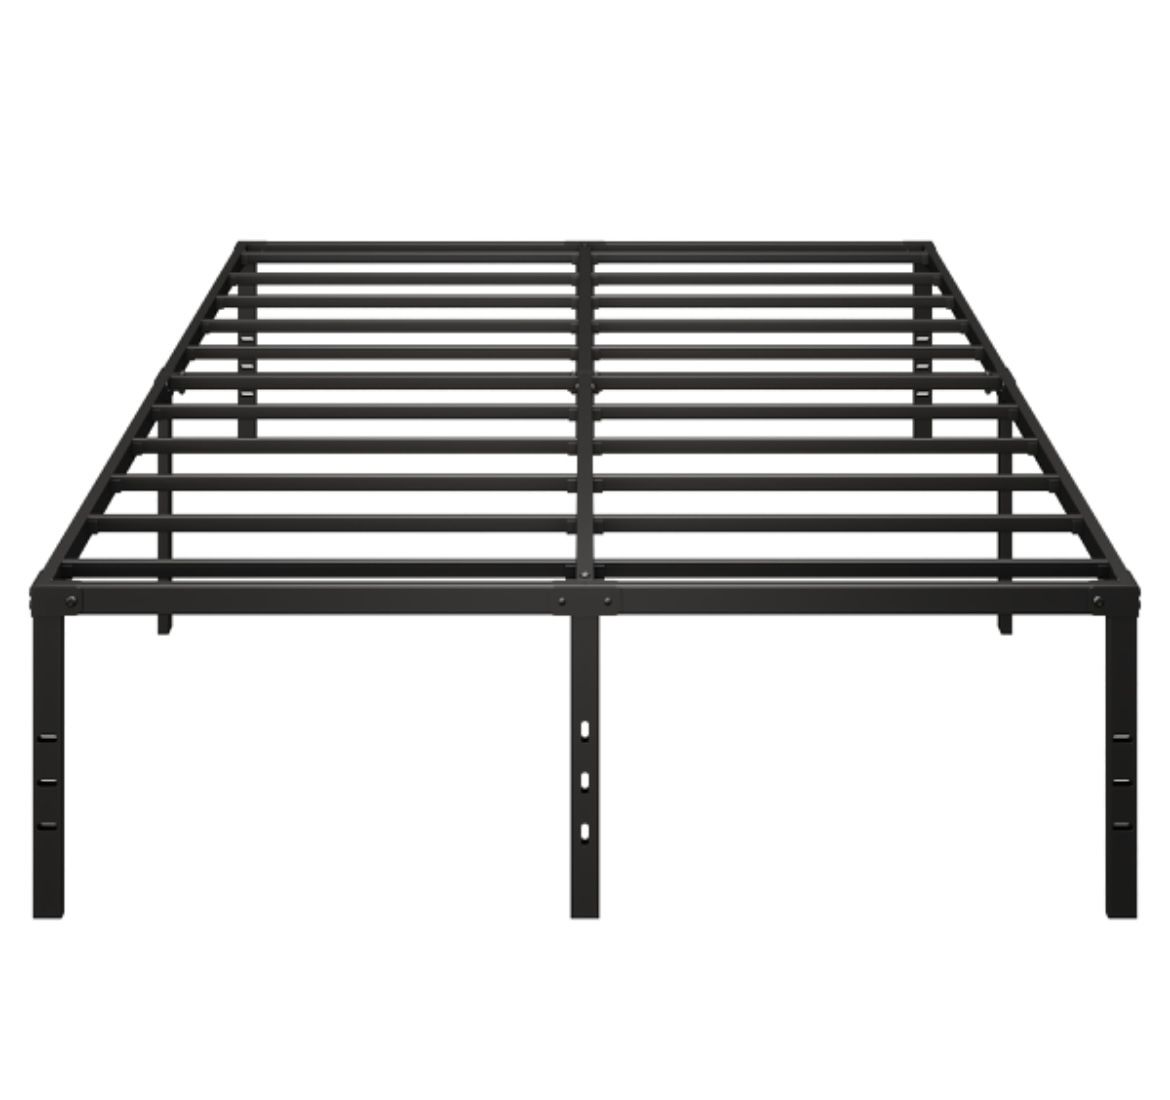 18 Inch High- Great for storage space- Heavy Duty Metal Bed Frame - Size: King